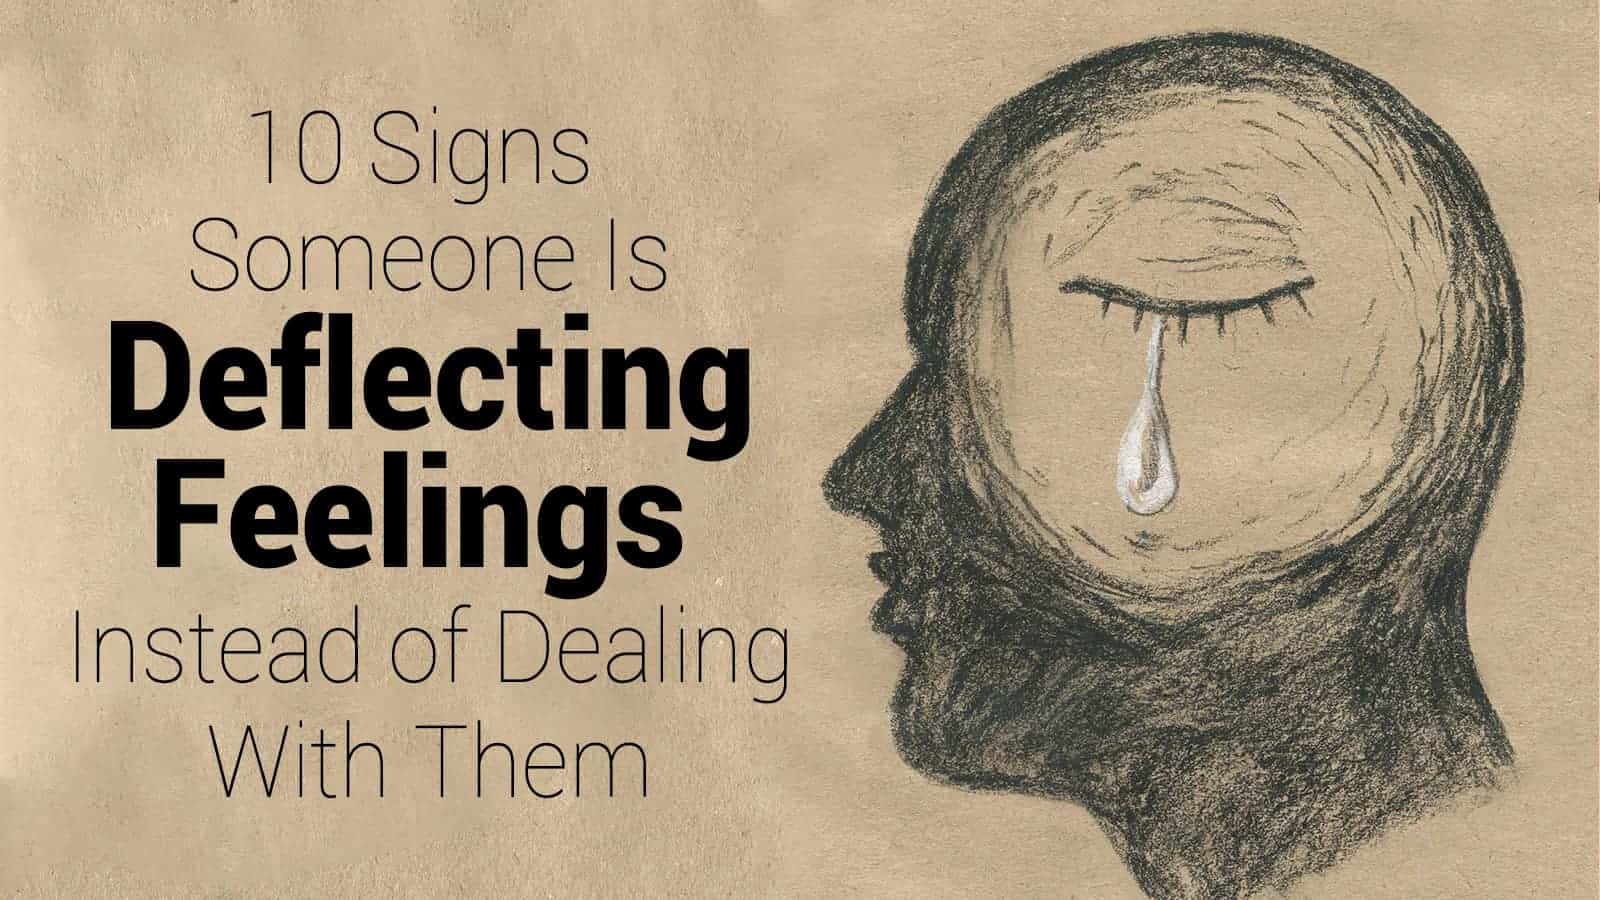 10 Signs Someone Is Deflecting Feelings Instead of Dealing With Them